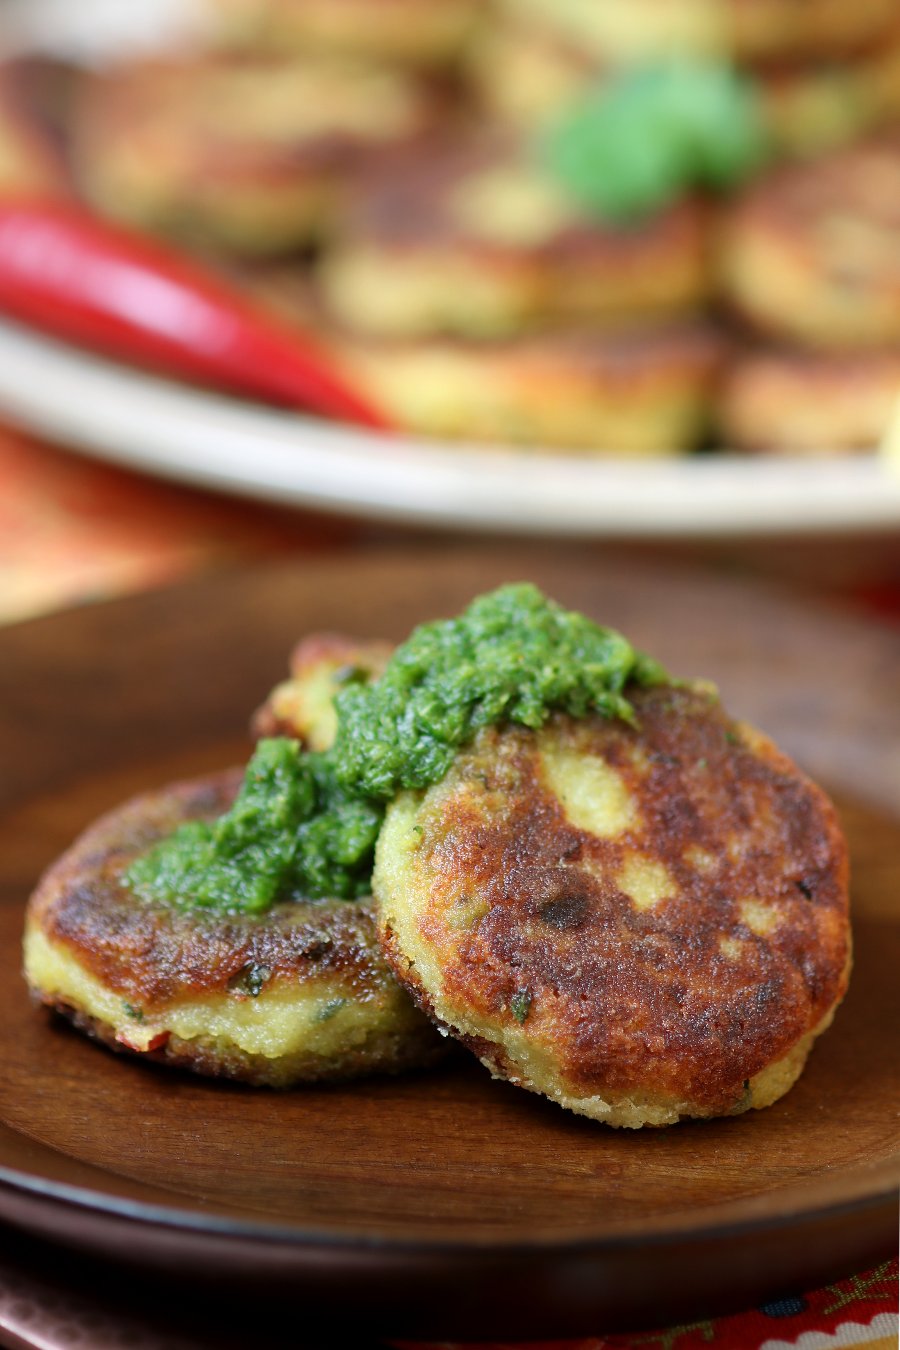 Spiced Potato Patties (Aloo Tikki) are a crisp and tender Indian street food snack that you can recreate in your kitchen.